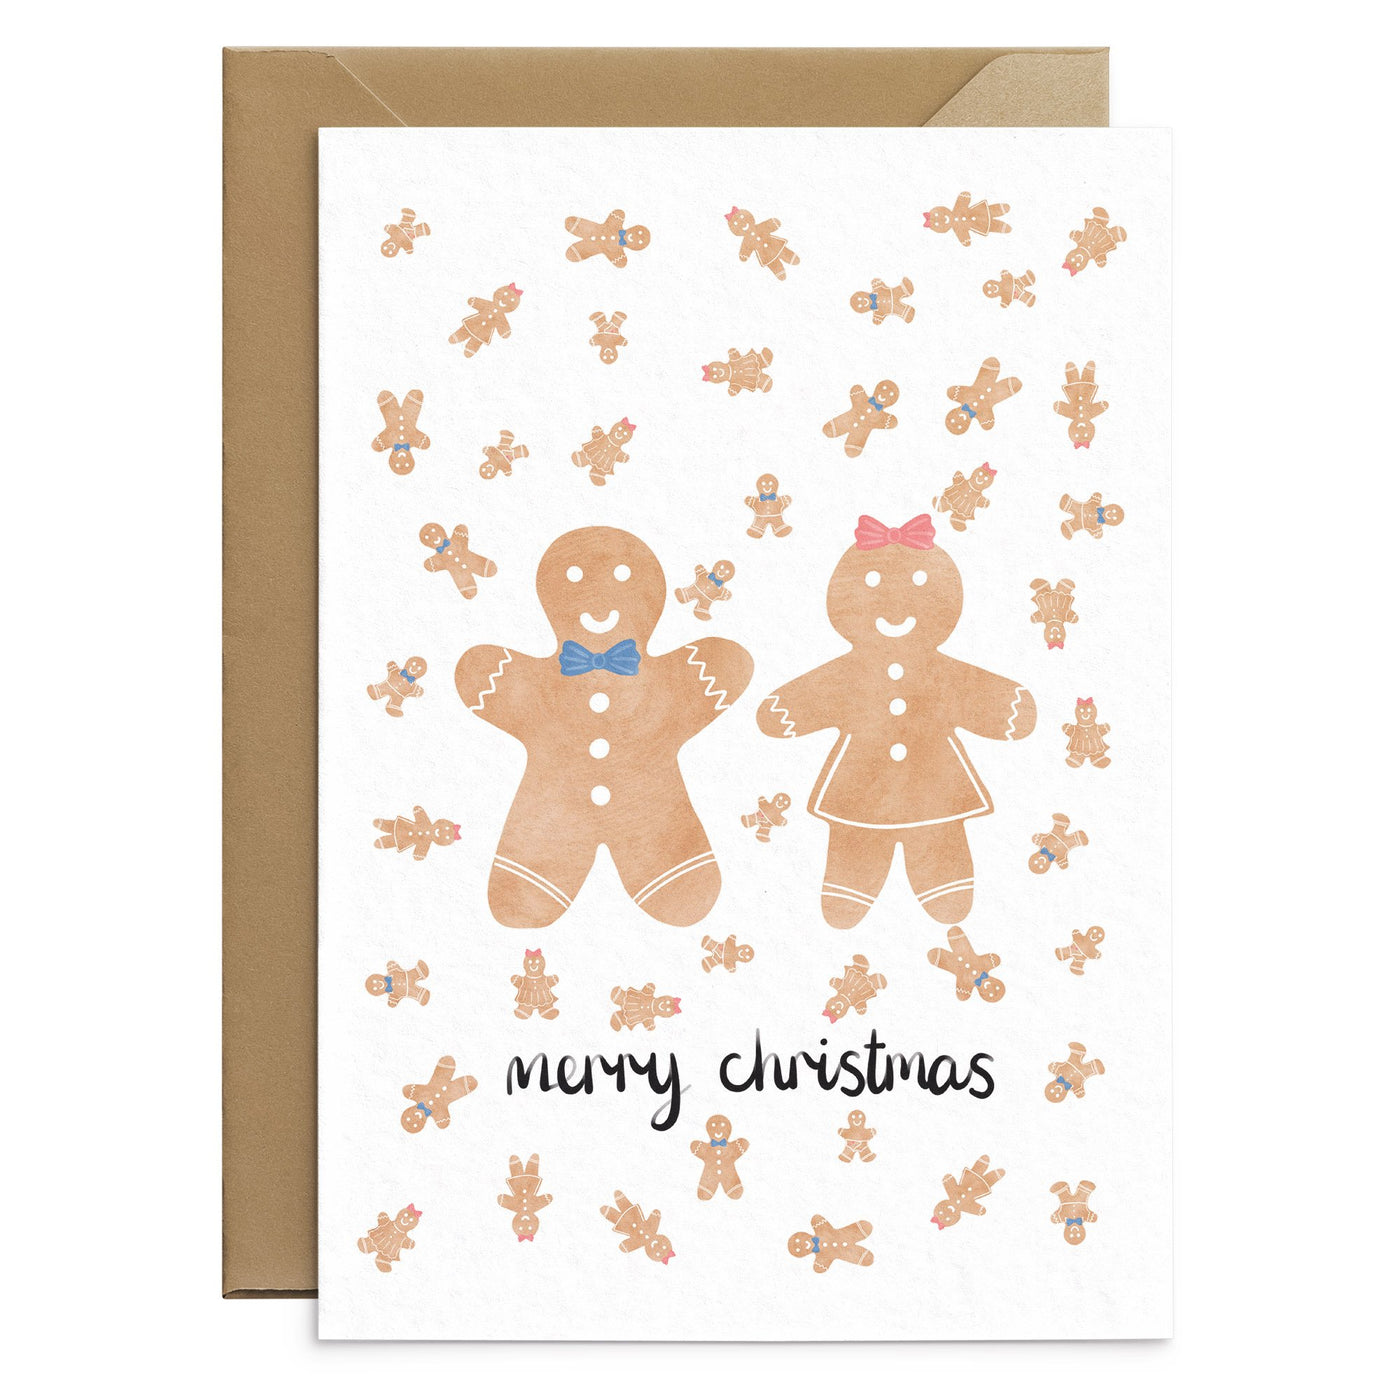 Gingerbread Man Christmas Card - Poppins & Co.